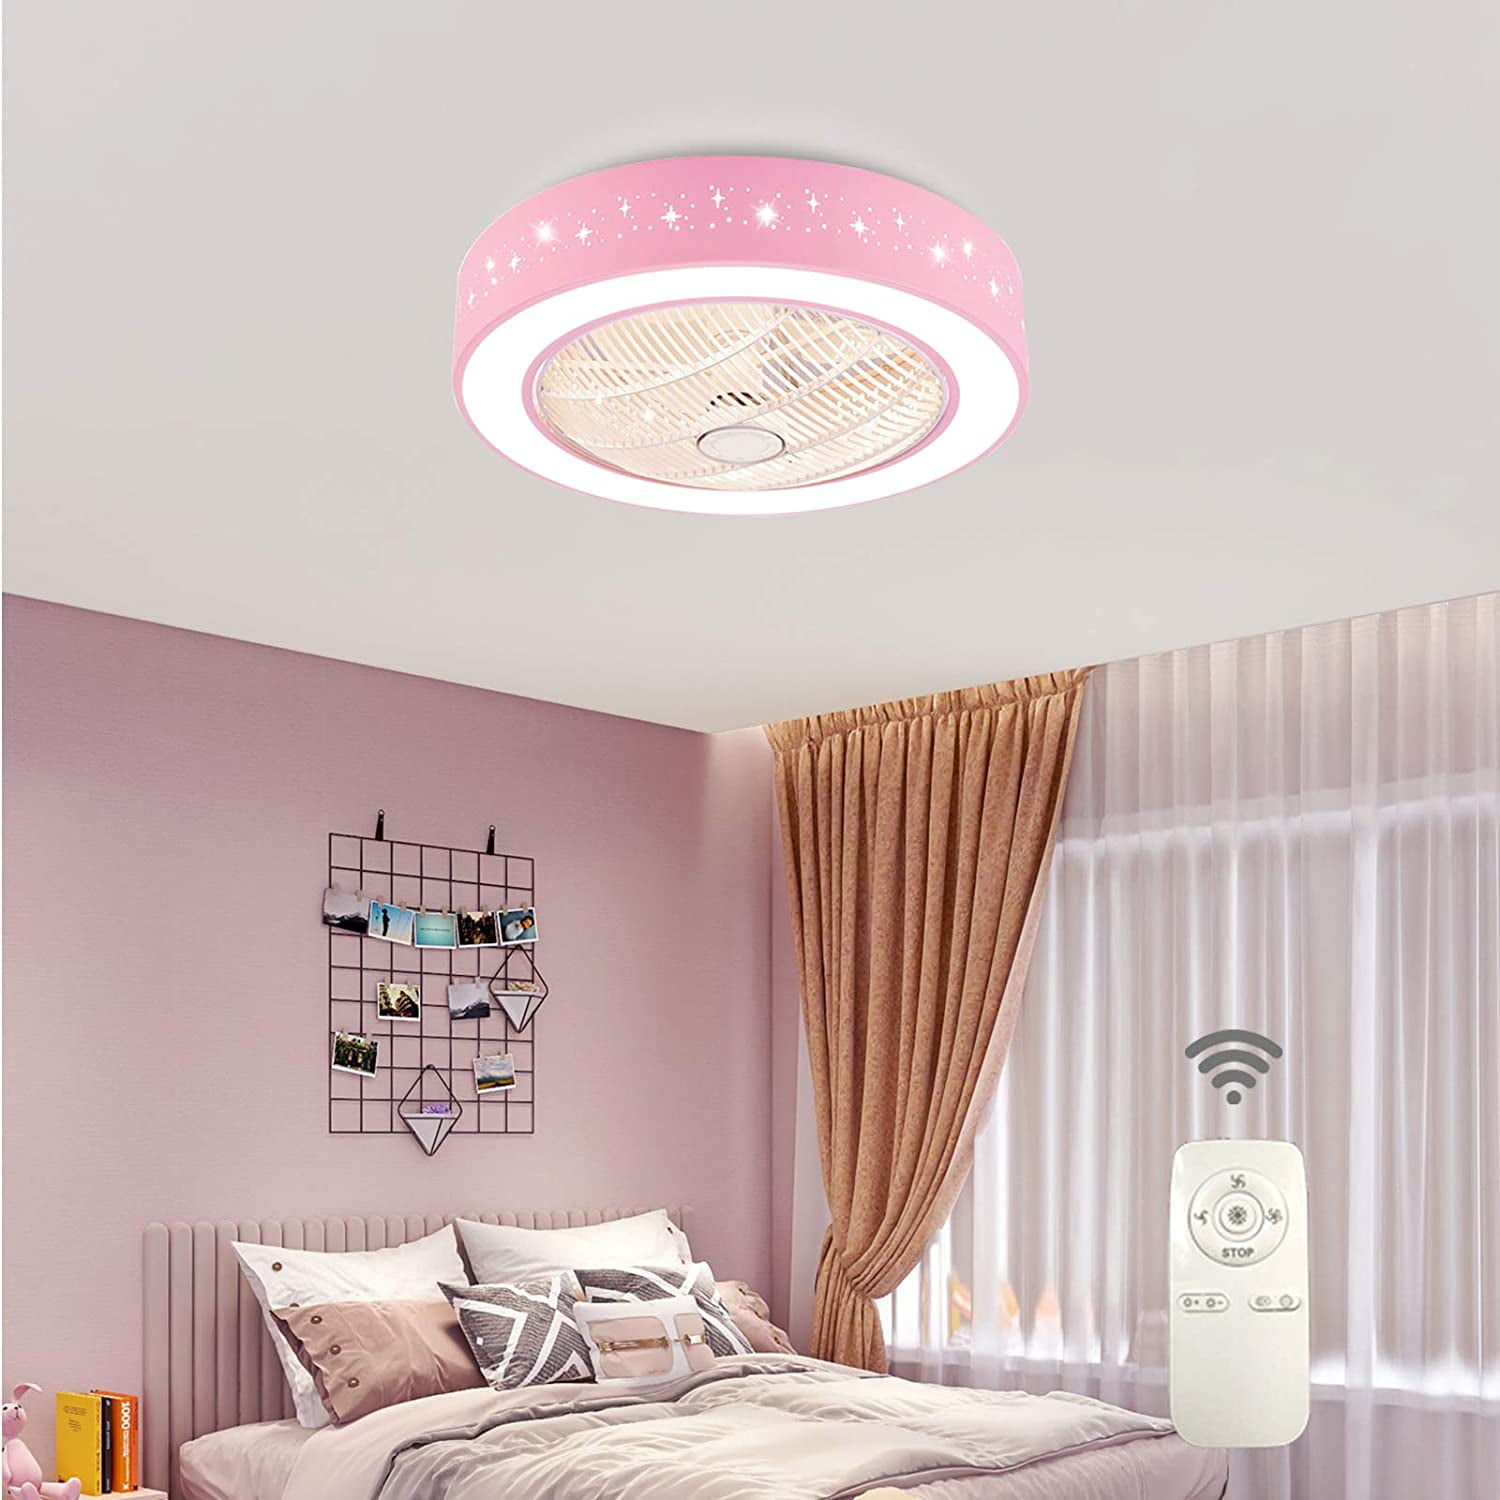 Wuzstar 21 6 Enclosed Ceiling Fan Light 3 Colors Sds Chandelier With Remote For Kids Girls Room Pink Com